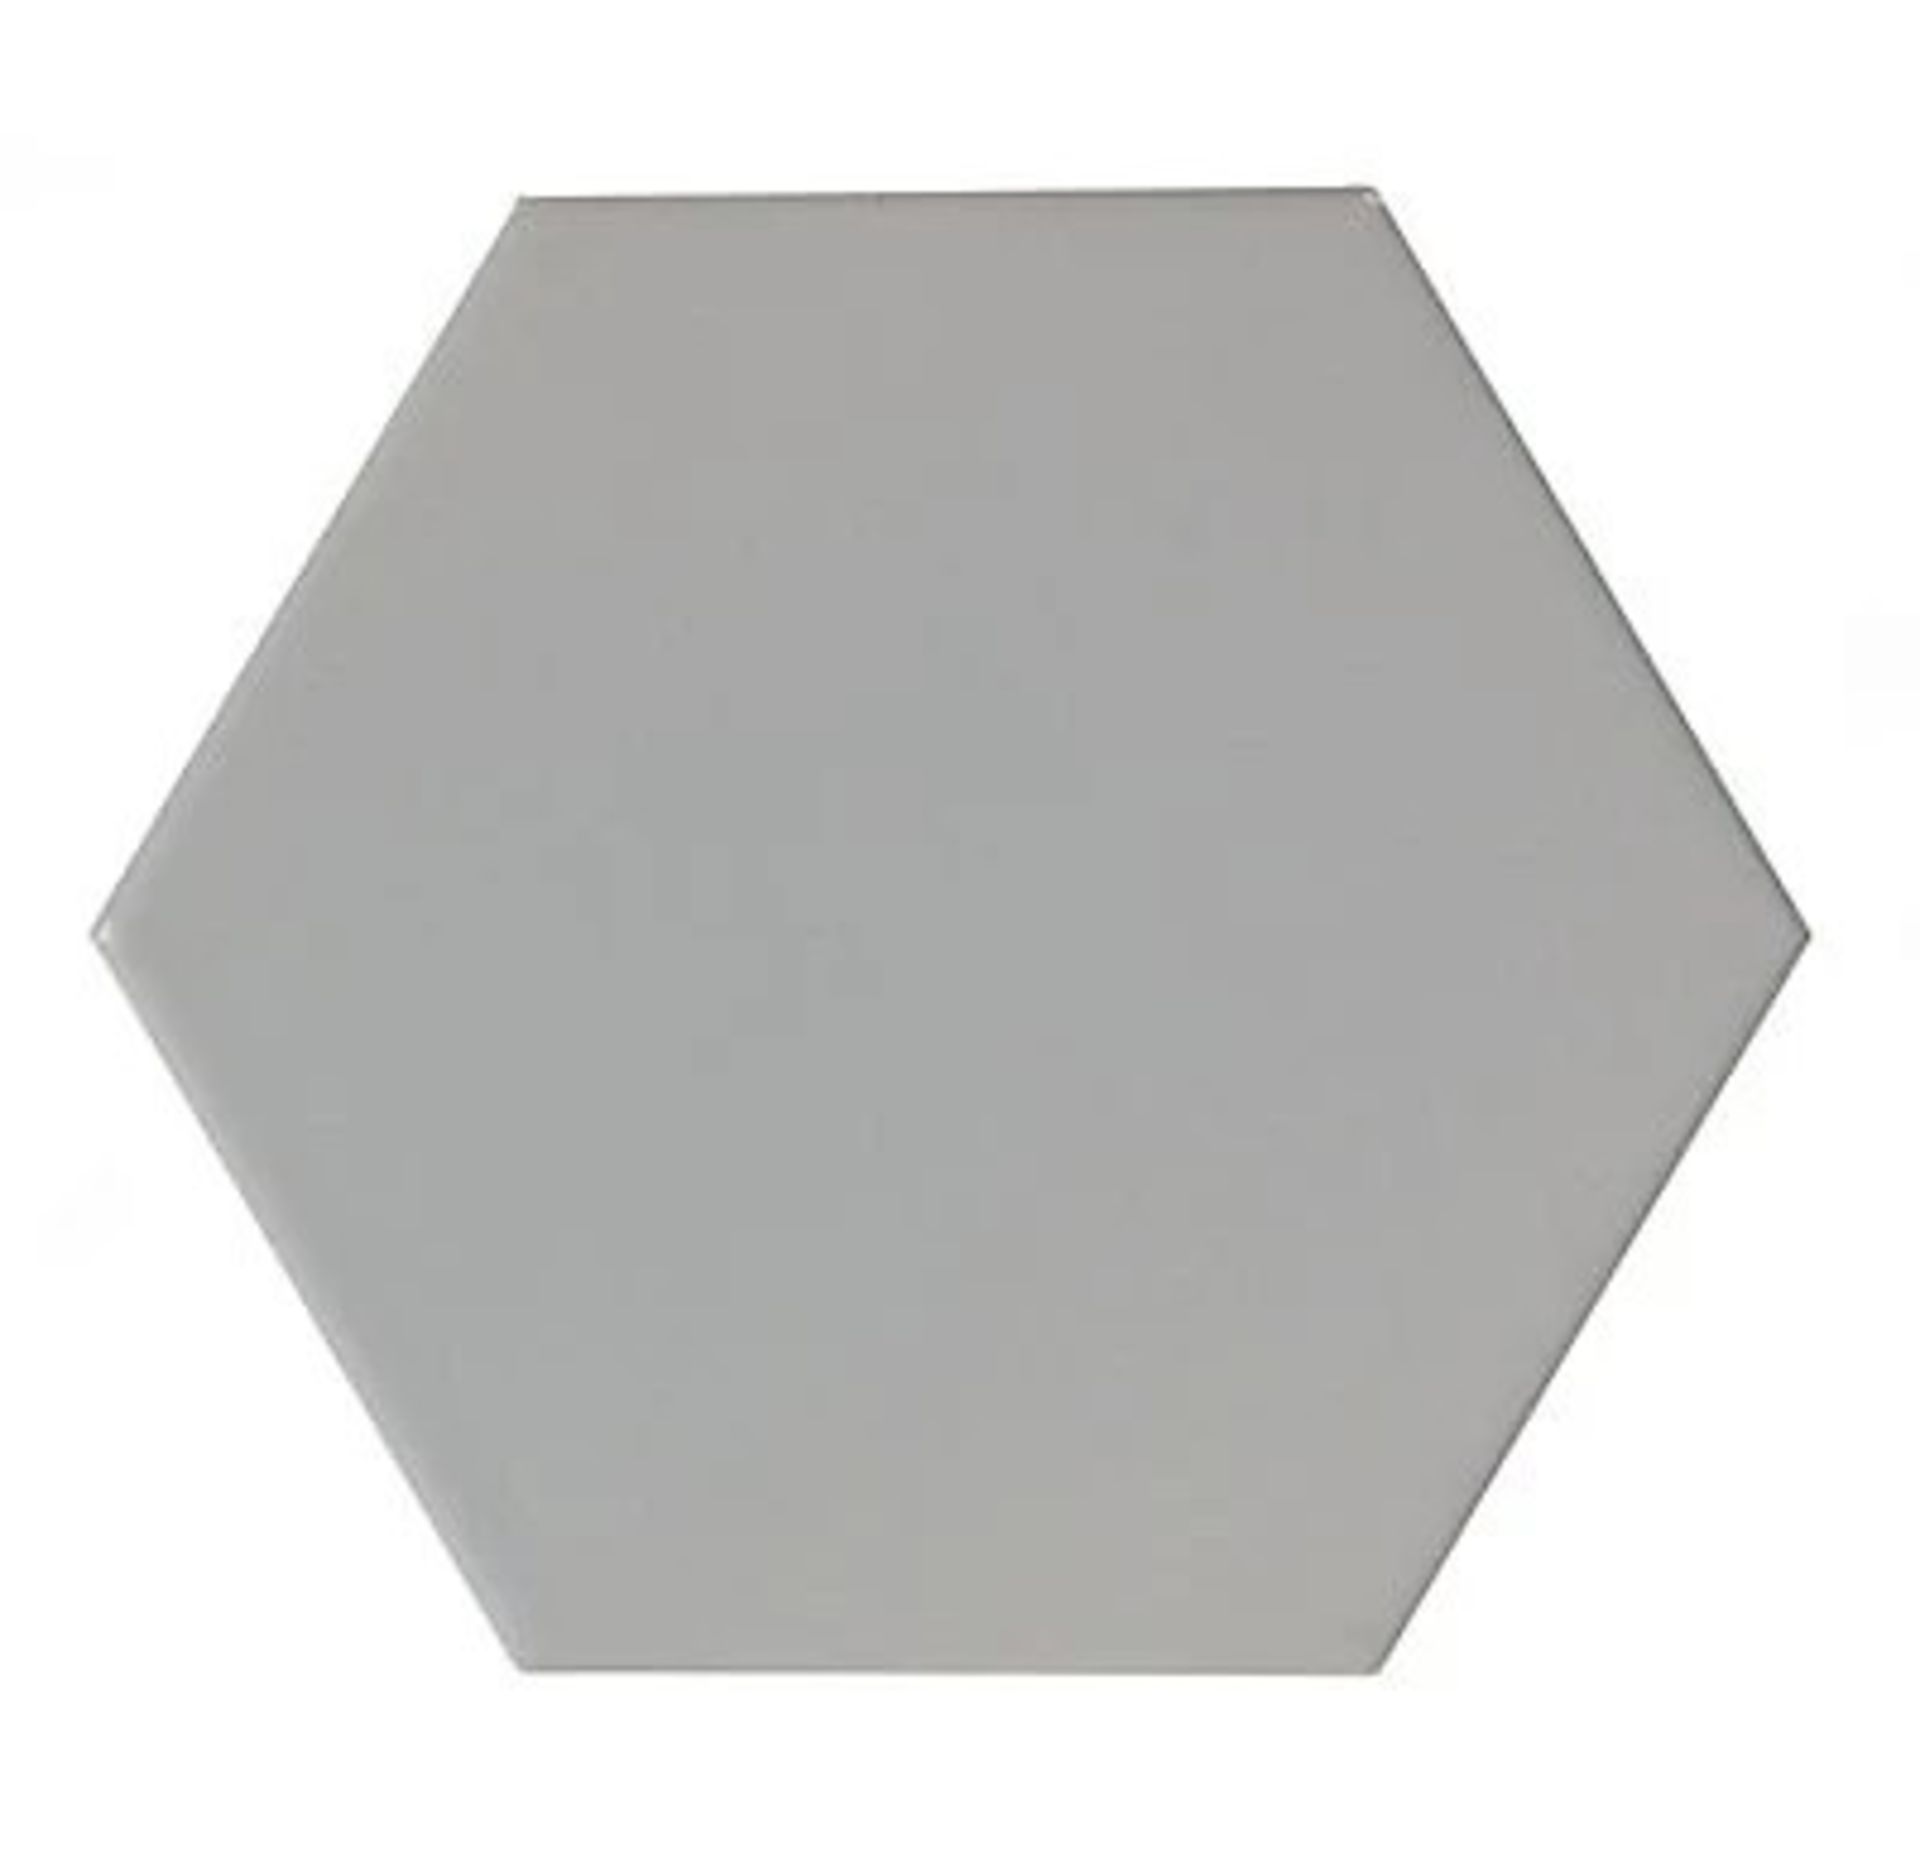 NEW 3m2 City Chic Soft grey Satin Hexagon Ceramic Wall tile, Pack of 50, (L)150mm (W)173mm. Muted, - Image 2 of 2